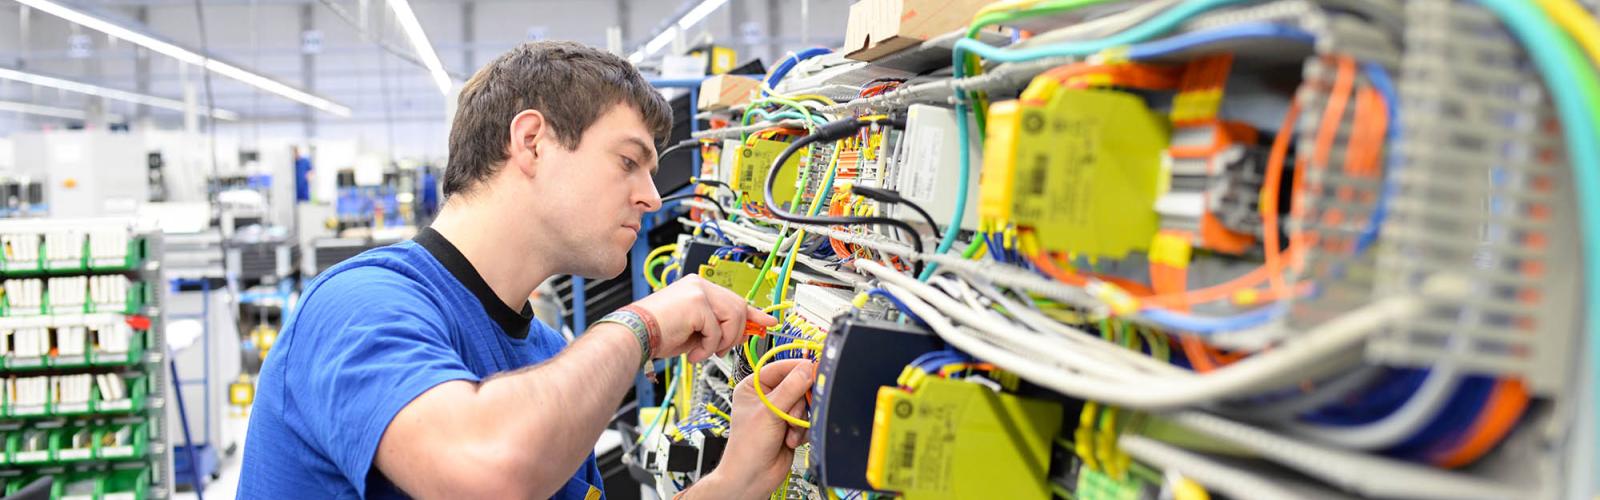 An electrical student working on hardware